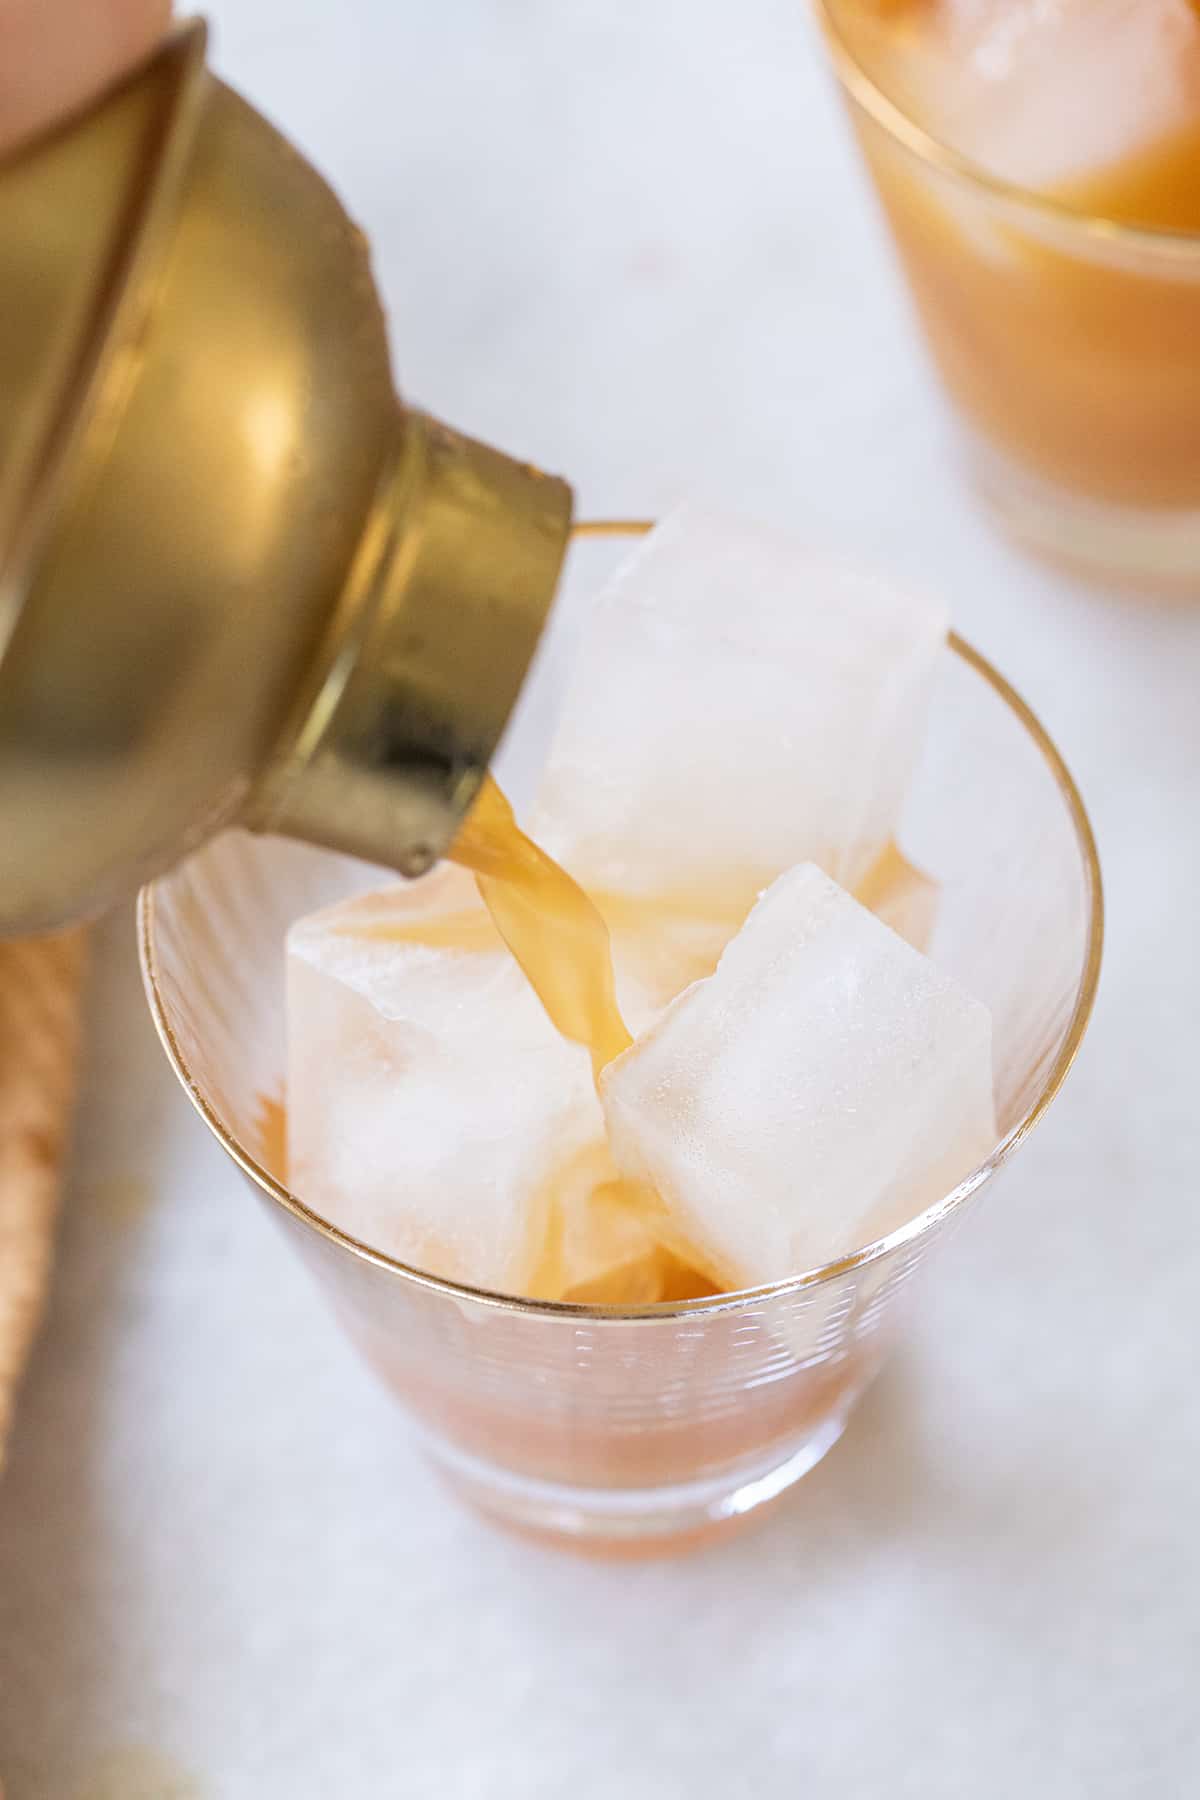 Pouring a rum cocktail into a glass filled with ice.